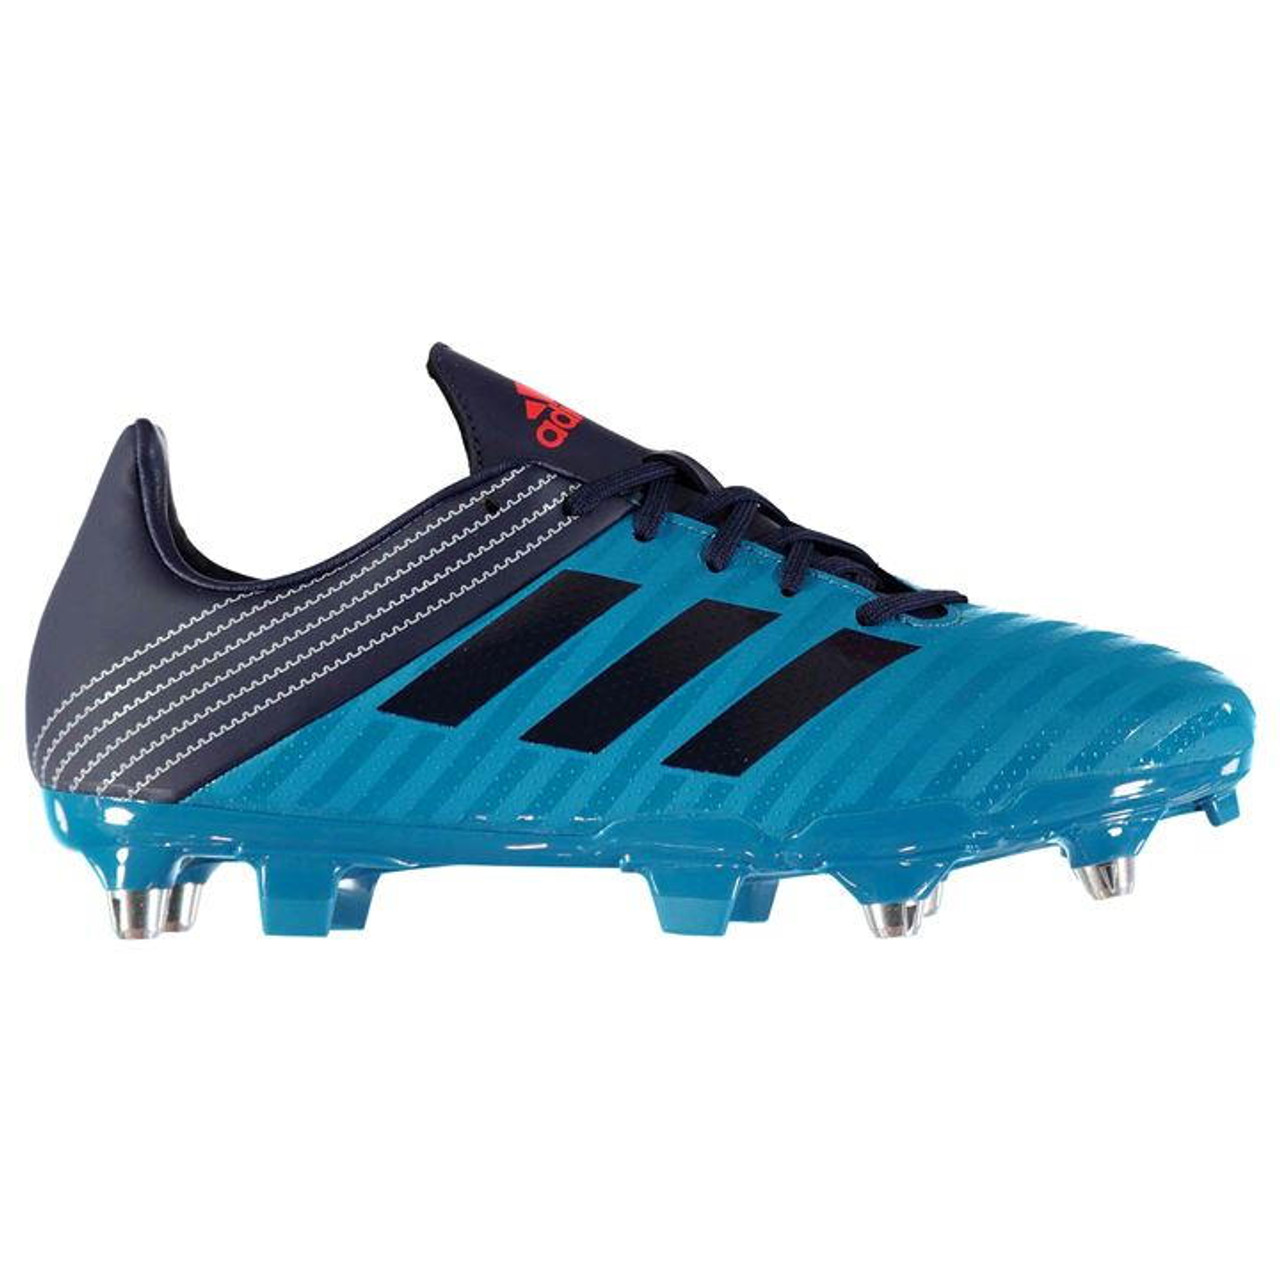 Adidas Malice Sg Rugby Boots On Sale At Rugby City 79 99